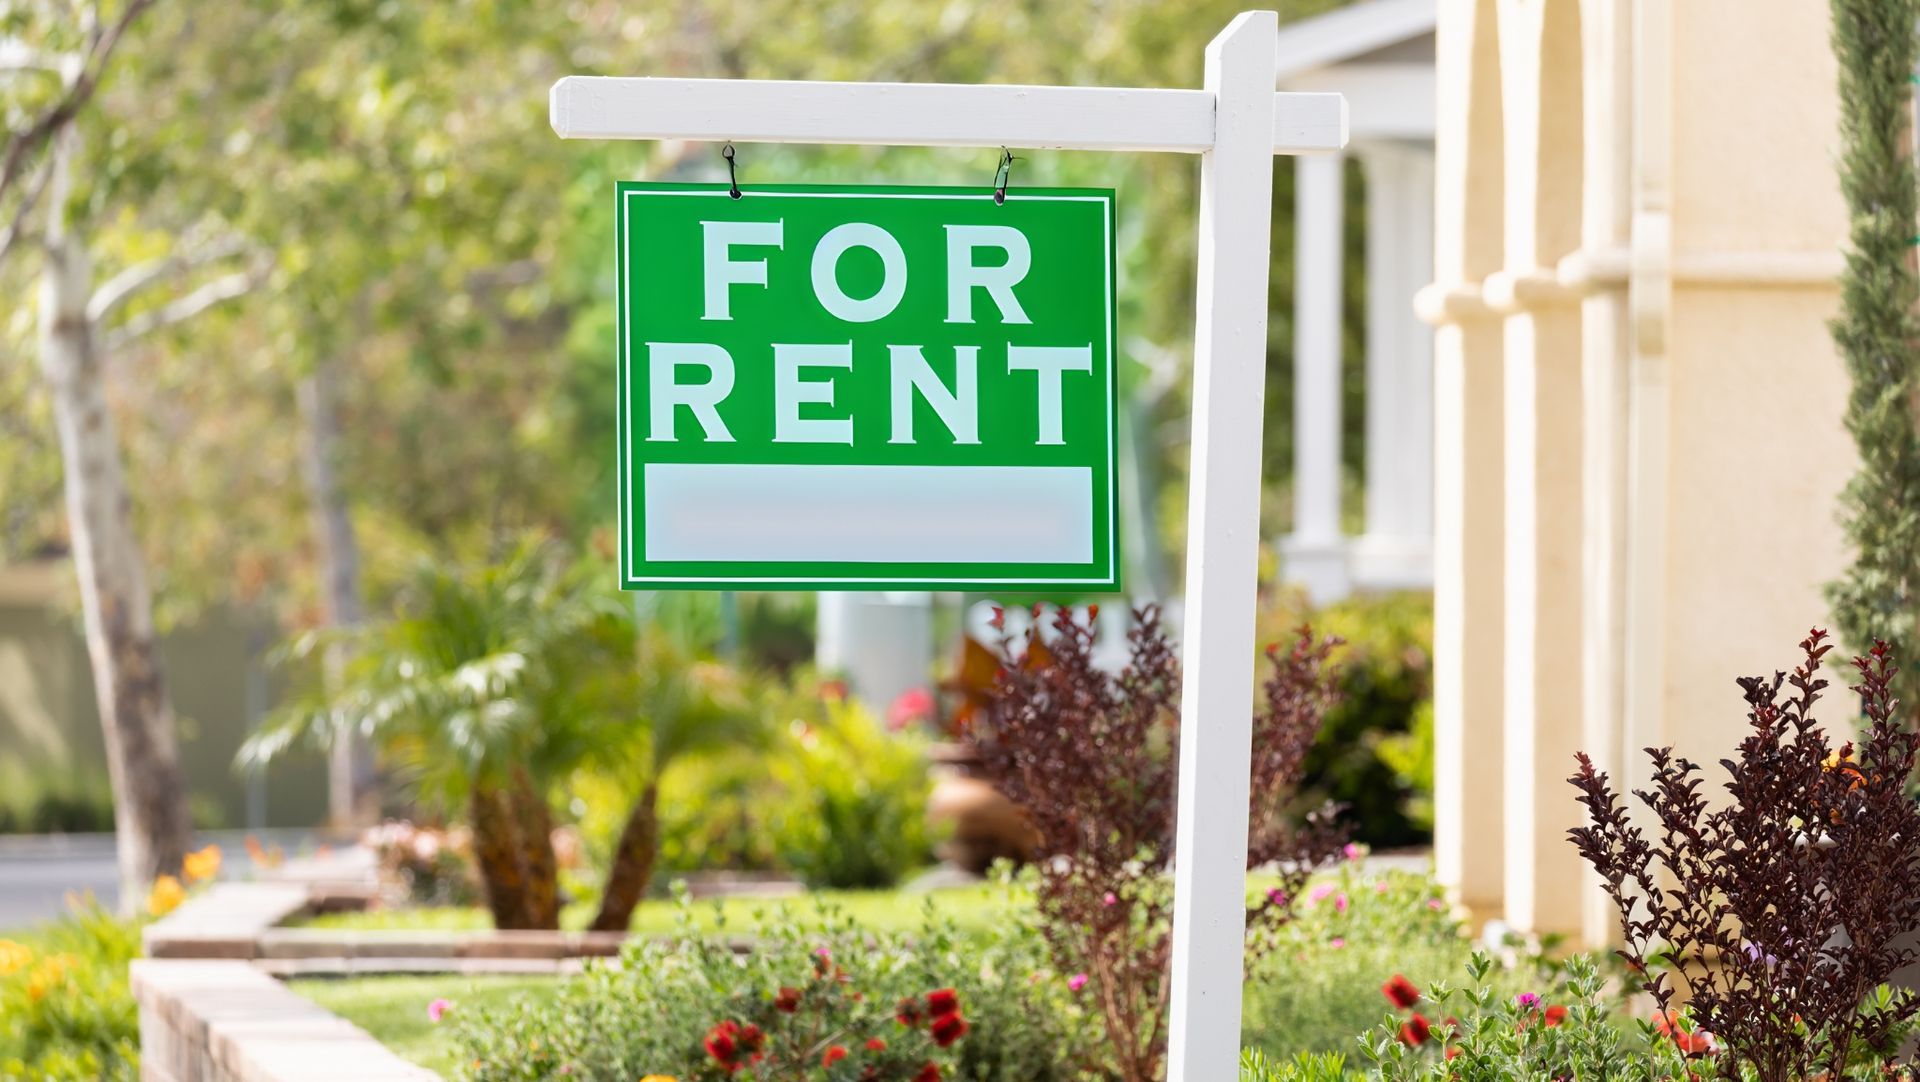 For rent sign displayed in front of a residential property, signaling availability in a welcoming neighborhood.